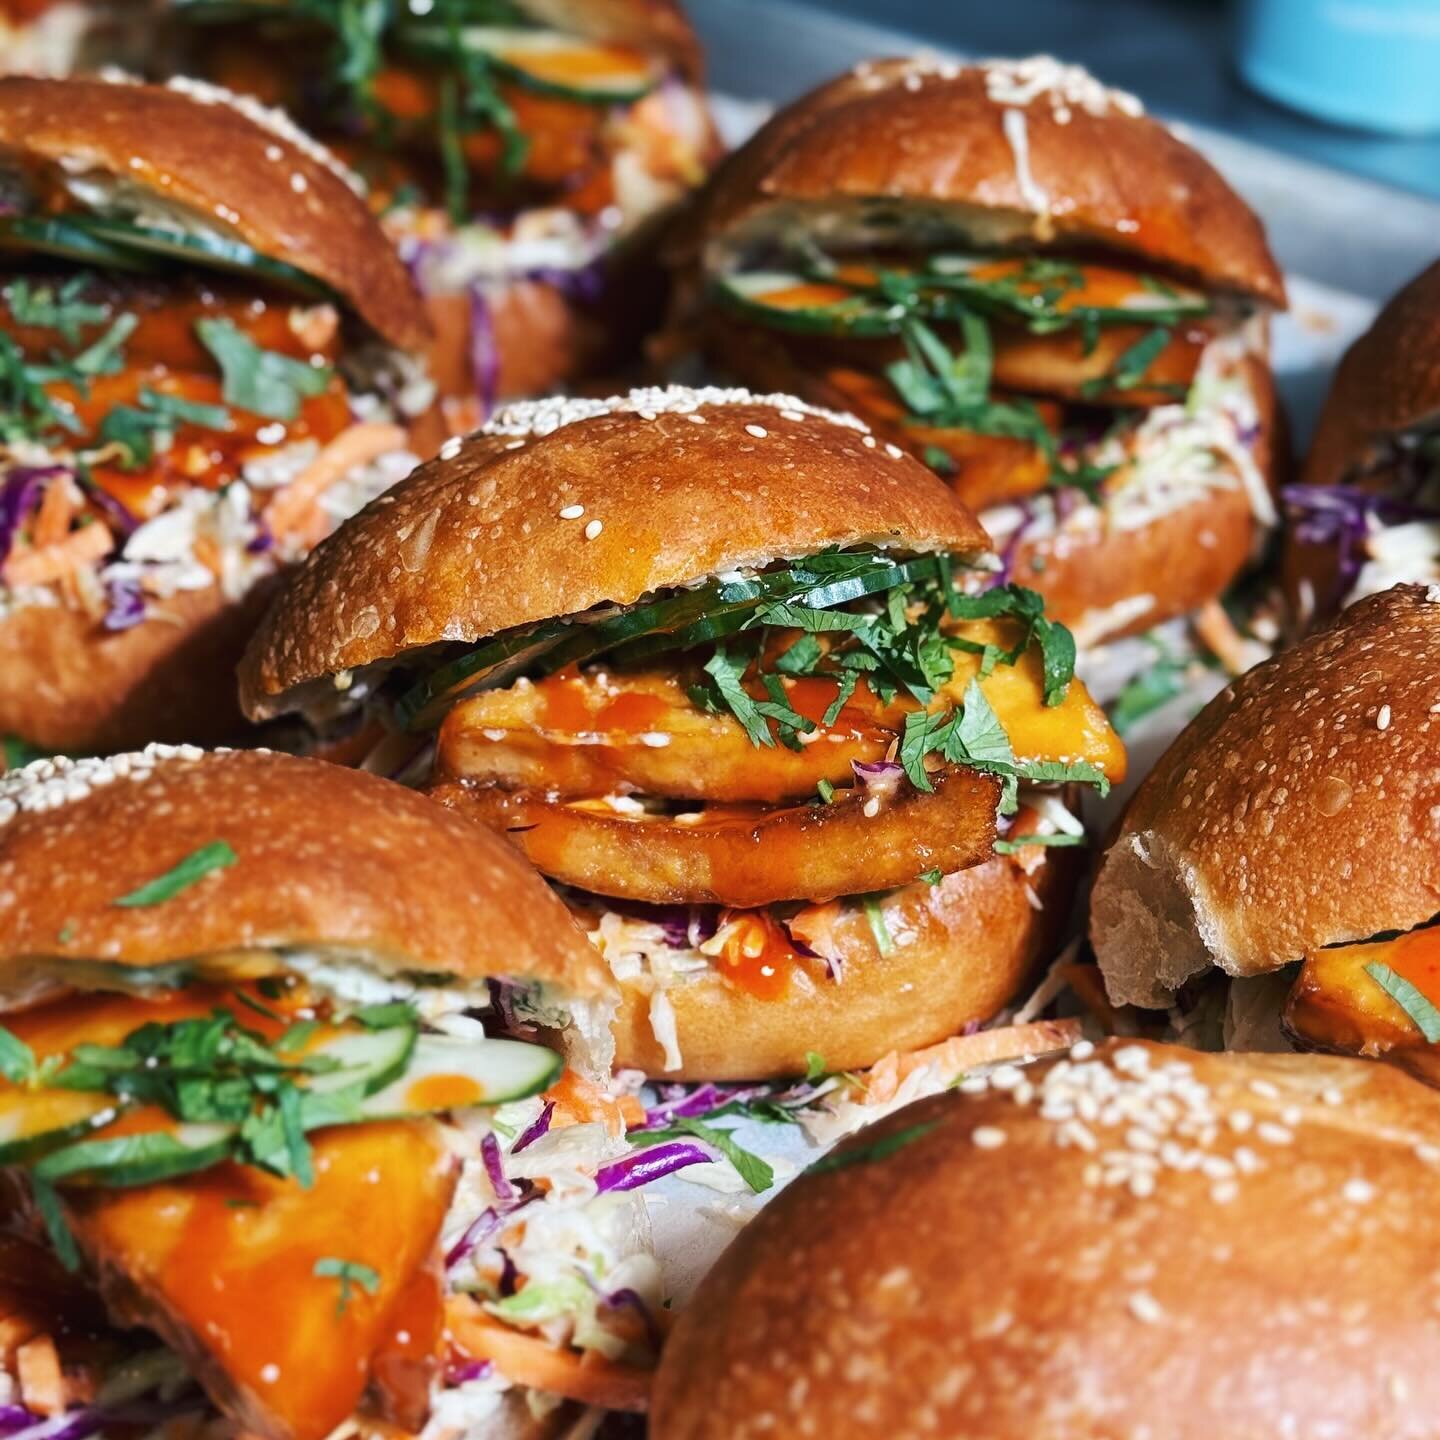 Bang Bang Crispy Tofu Sammie ❤️&zwj;🔥
House-made ranch, slaw, crispy tofu, fresh herbs and bang bang sauce in our house-made sesame seed brioche bun - available throughout the month of April! 🥪